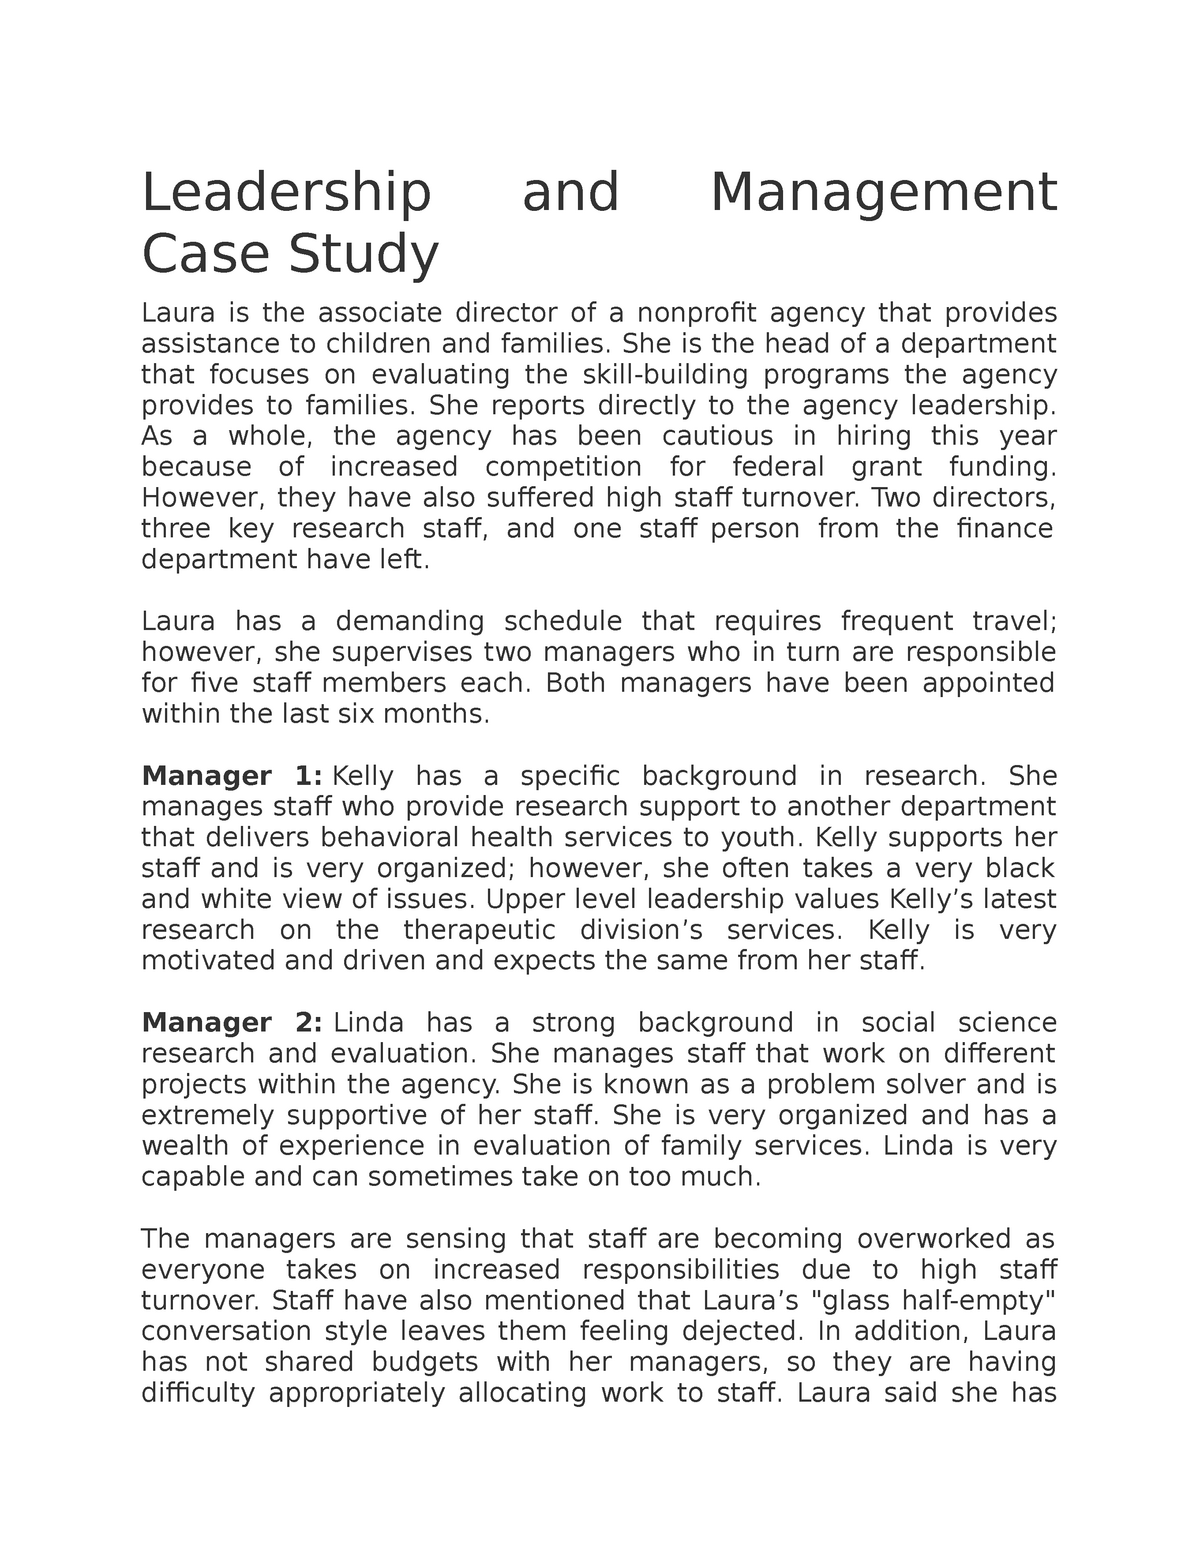 leadership case study with questions and answers